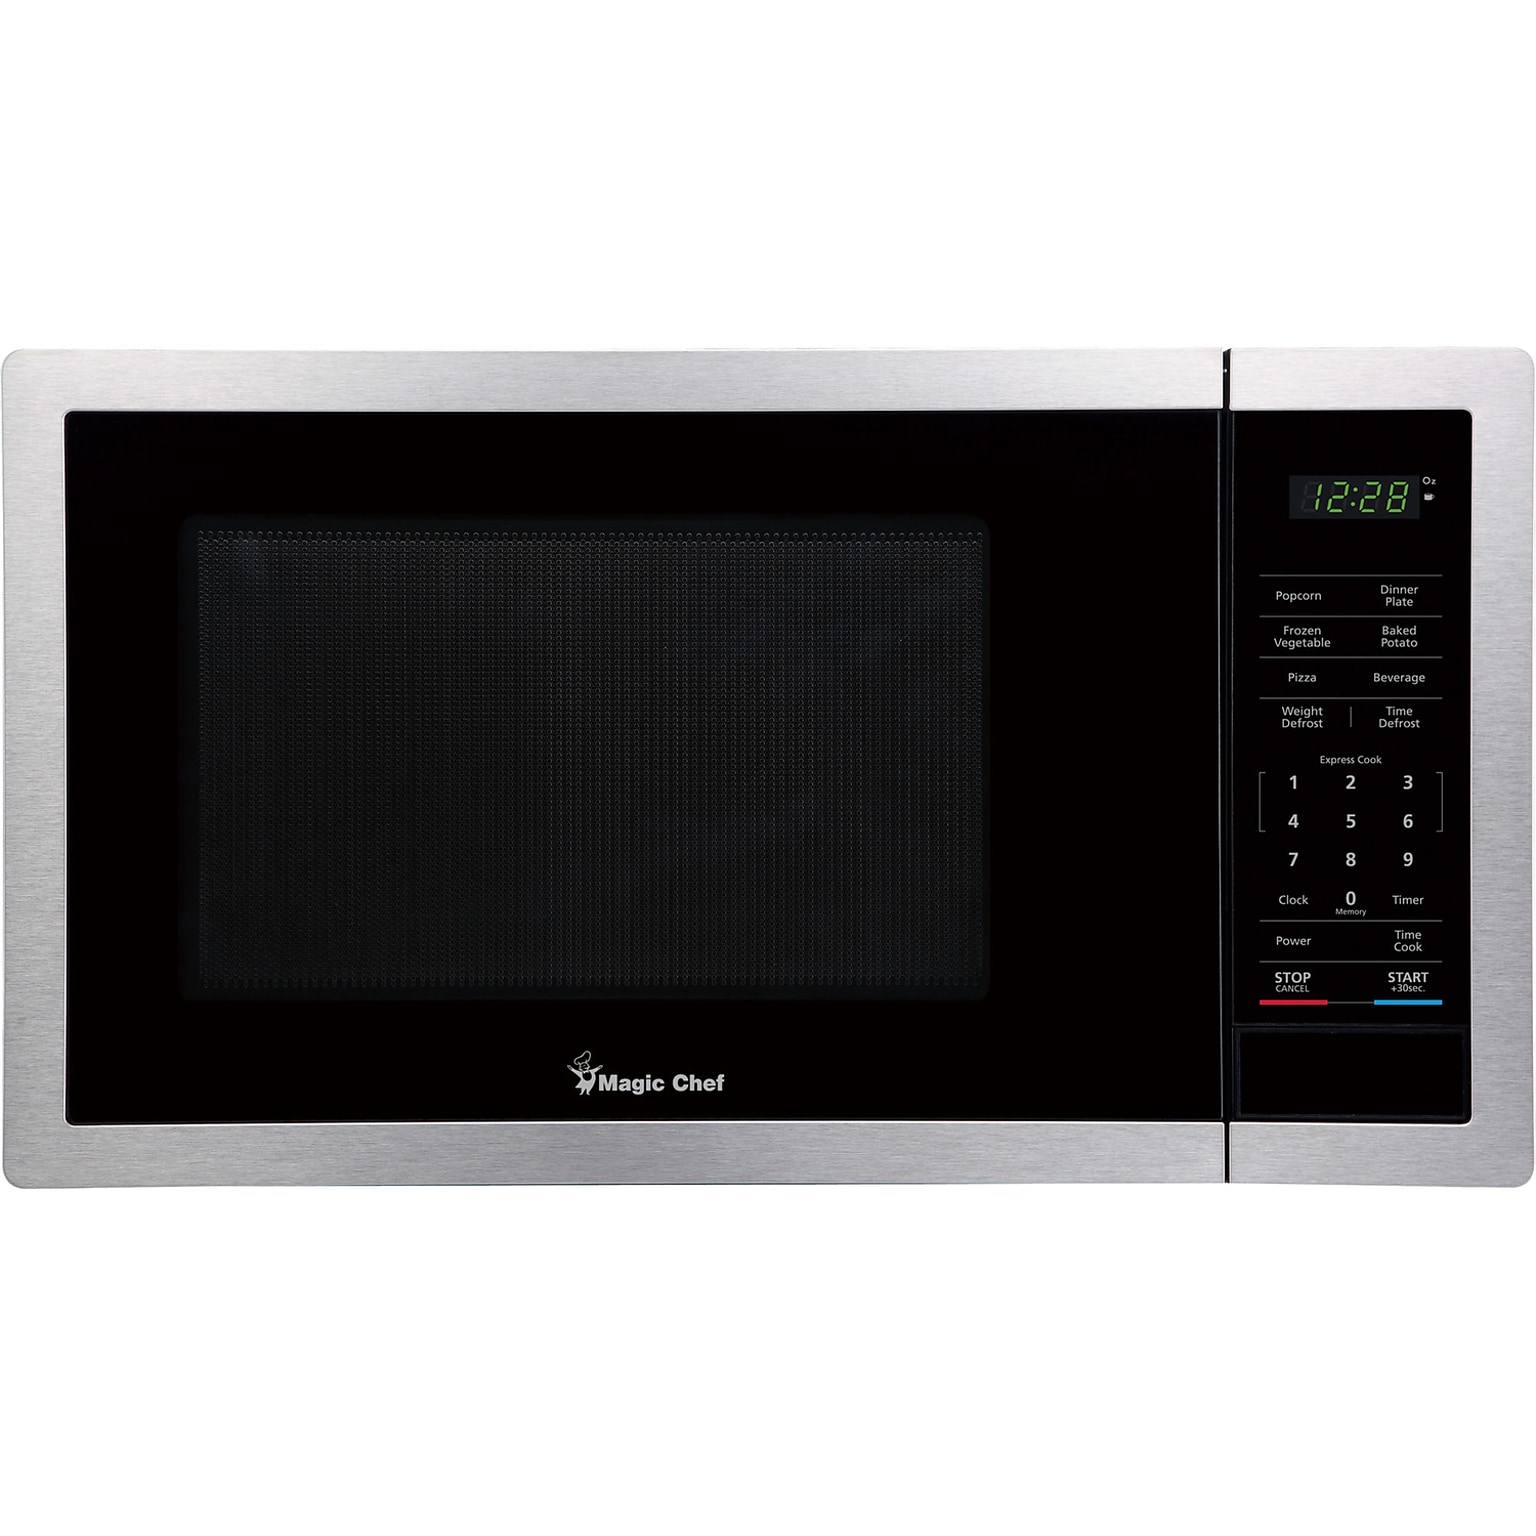 Magic Chef 0.9-Cu. Ft. 900W Countertop Digital Touch Microwave, Stainless Steel (MC99MST)